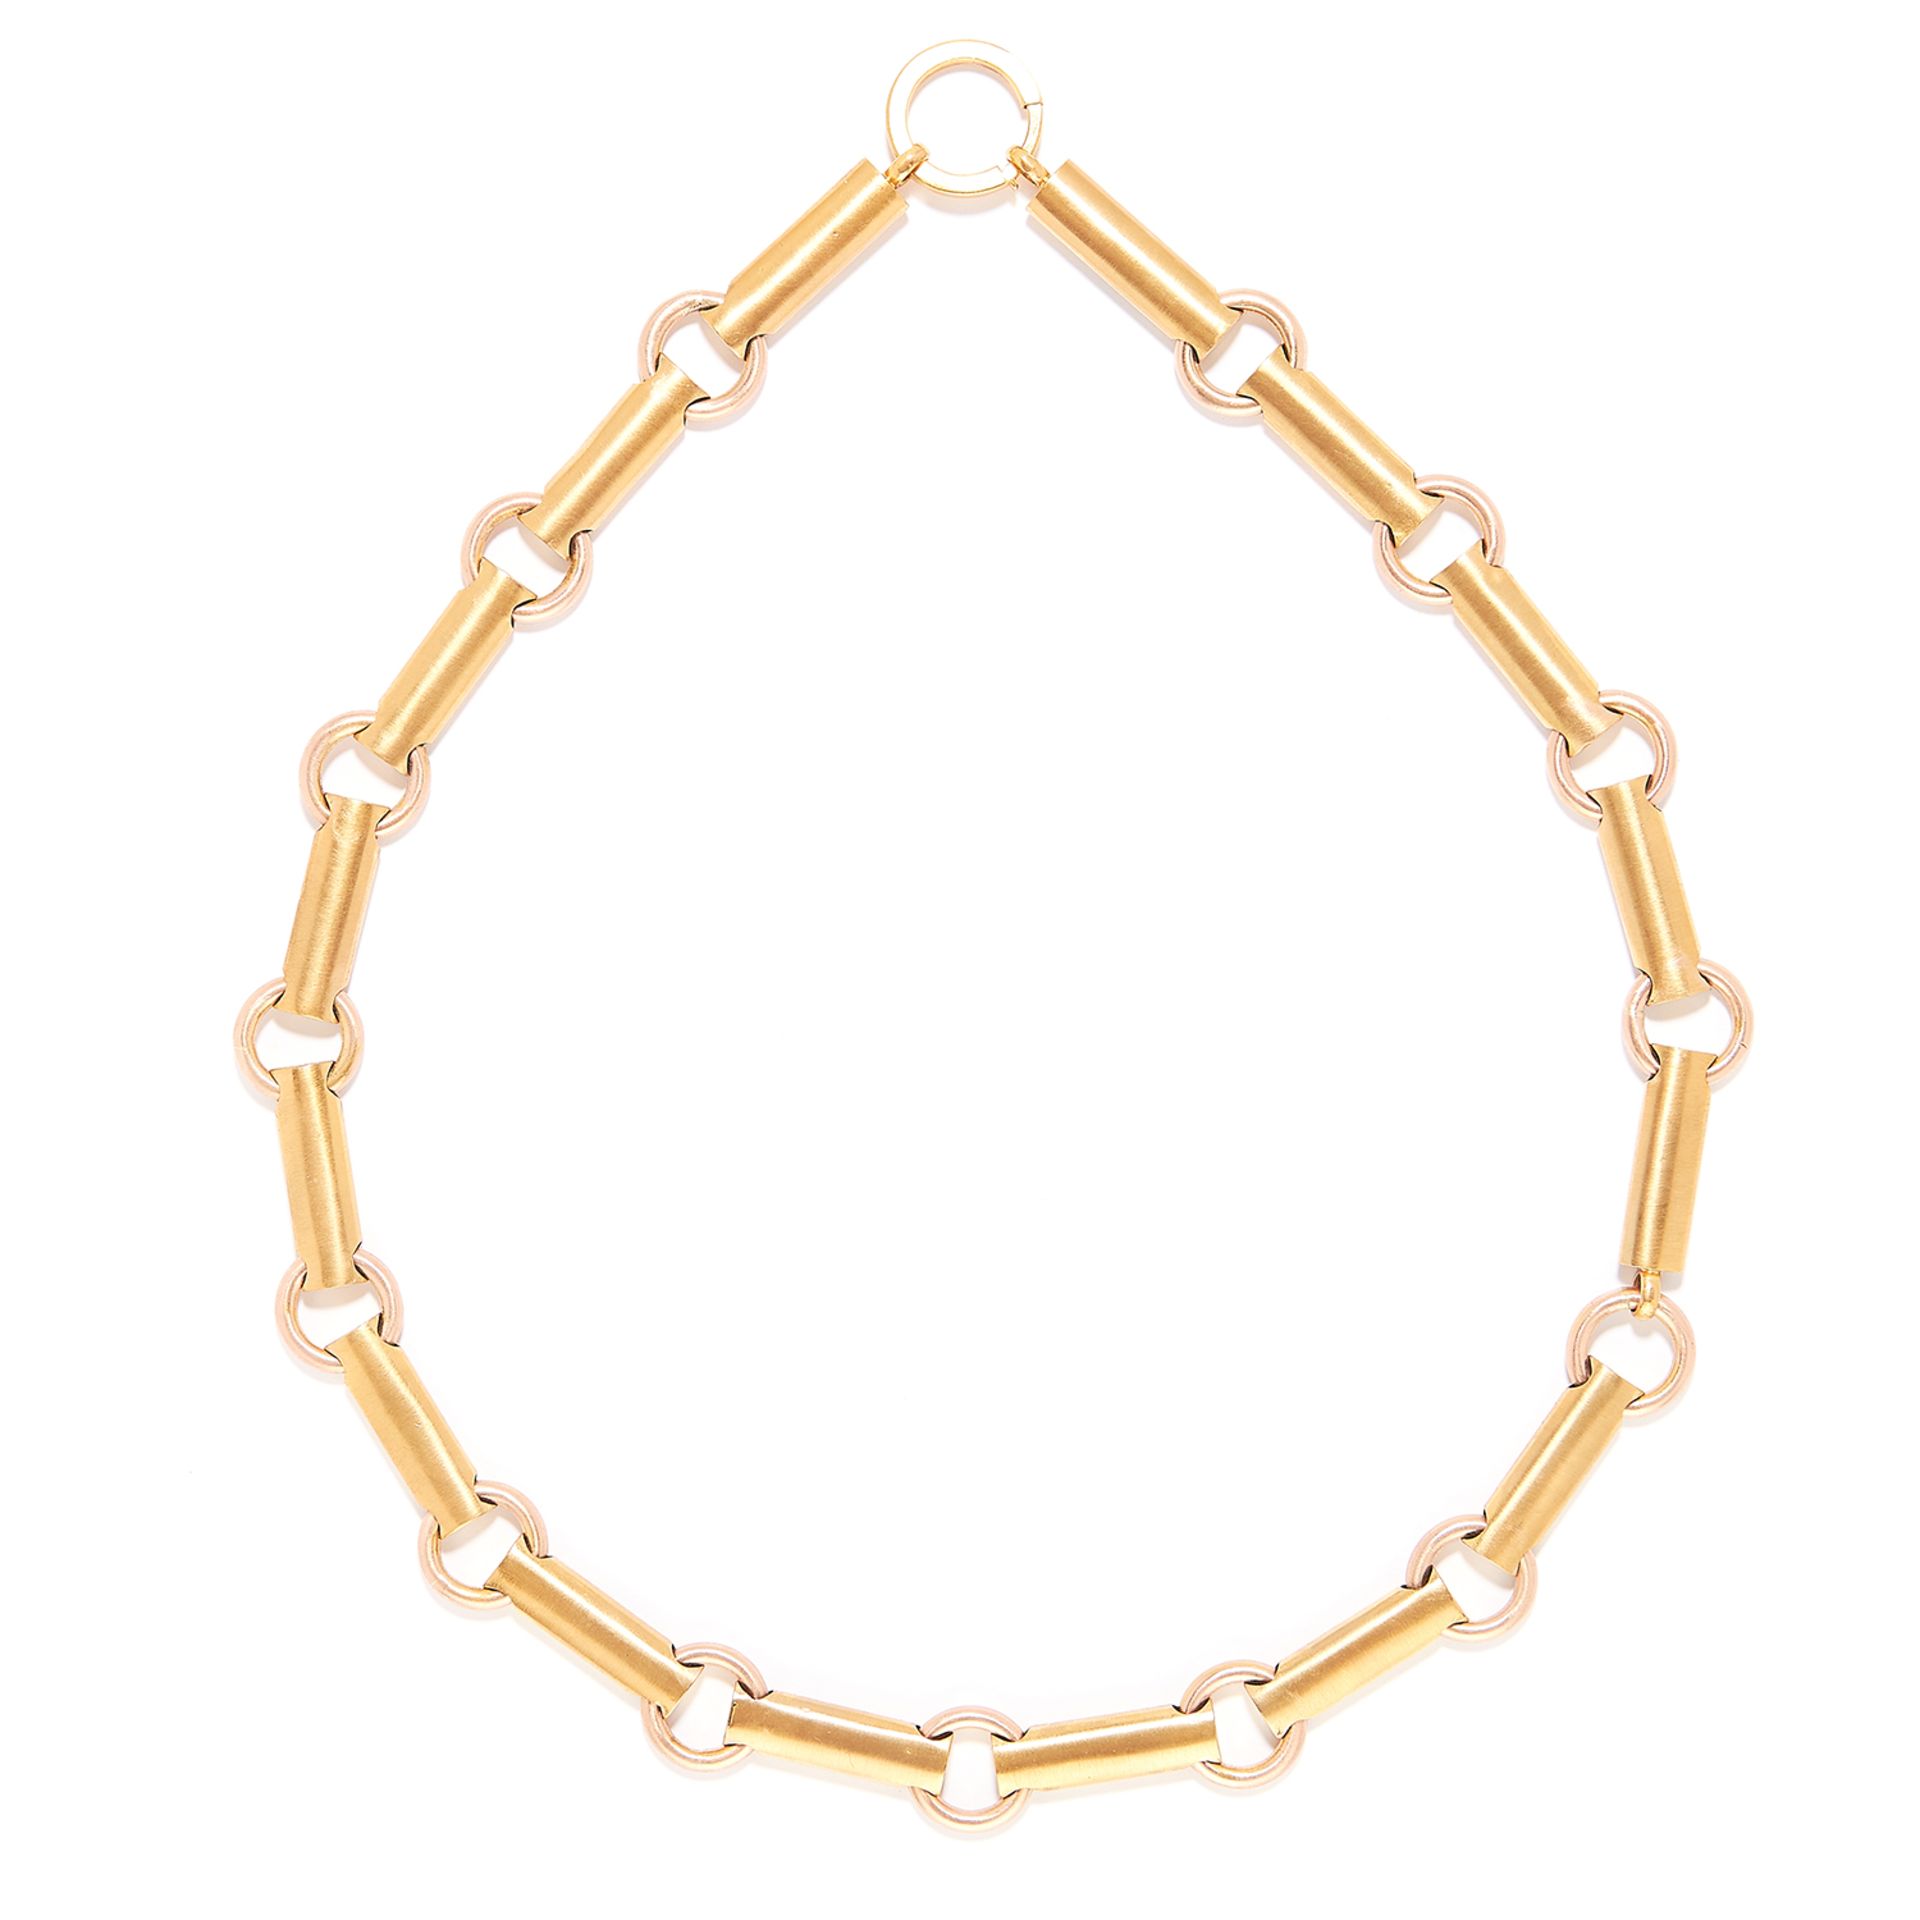 YELLOW GOLD FANCY LINK CHAIN in yellow gold, comprising of alternating circular and baton links,